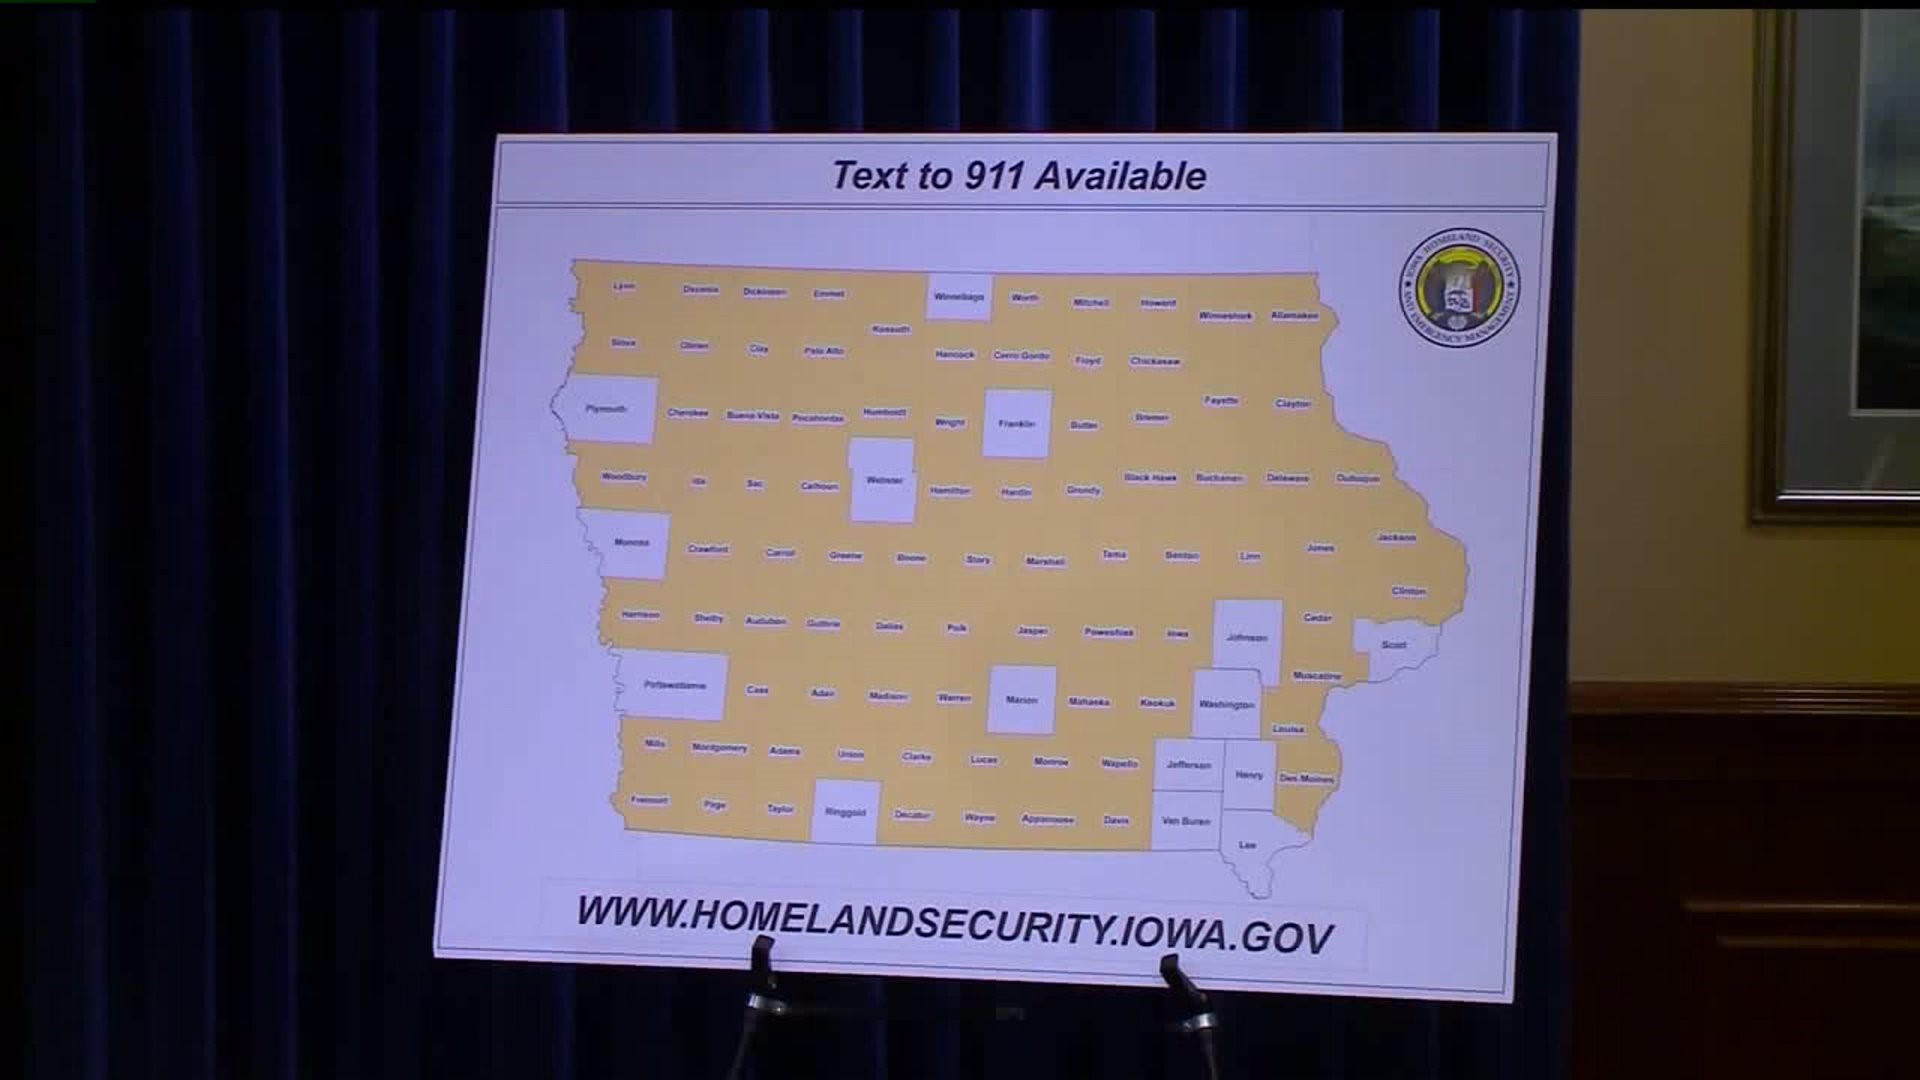 Text to 911 in Iowa